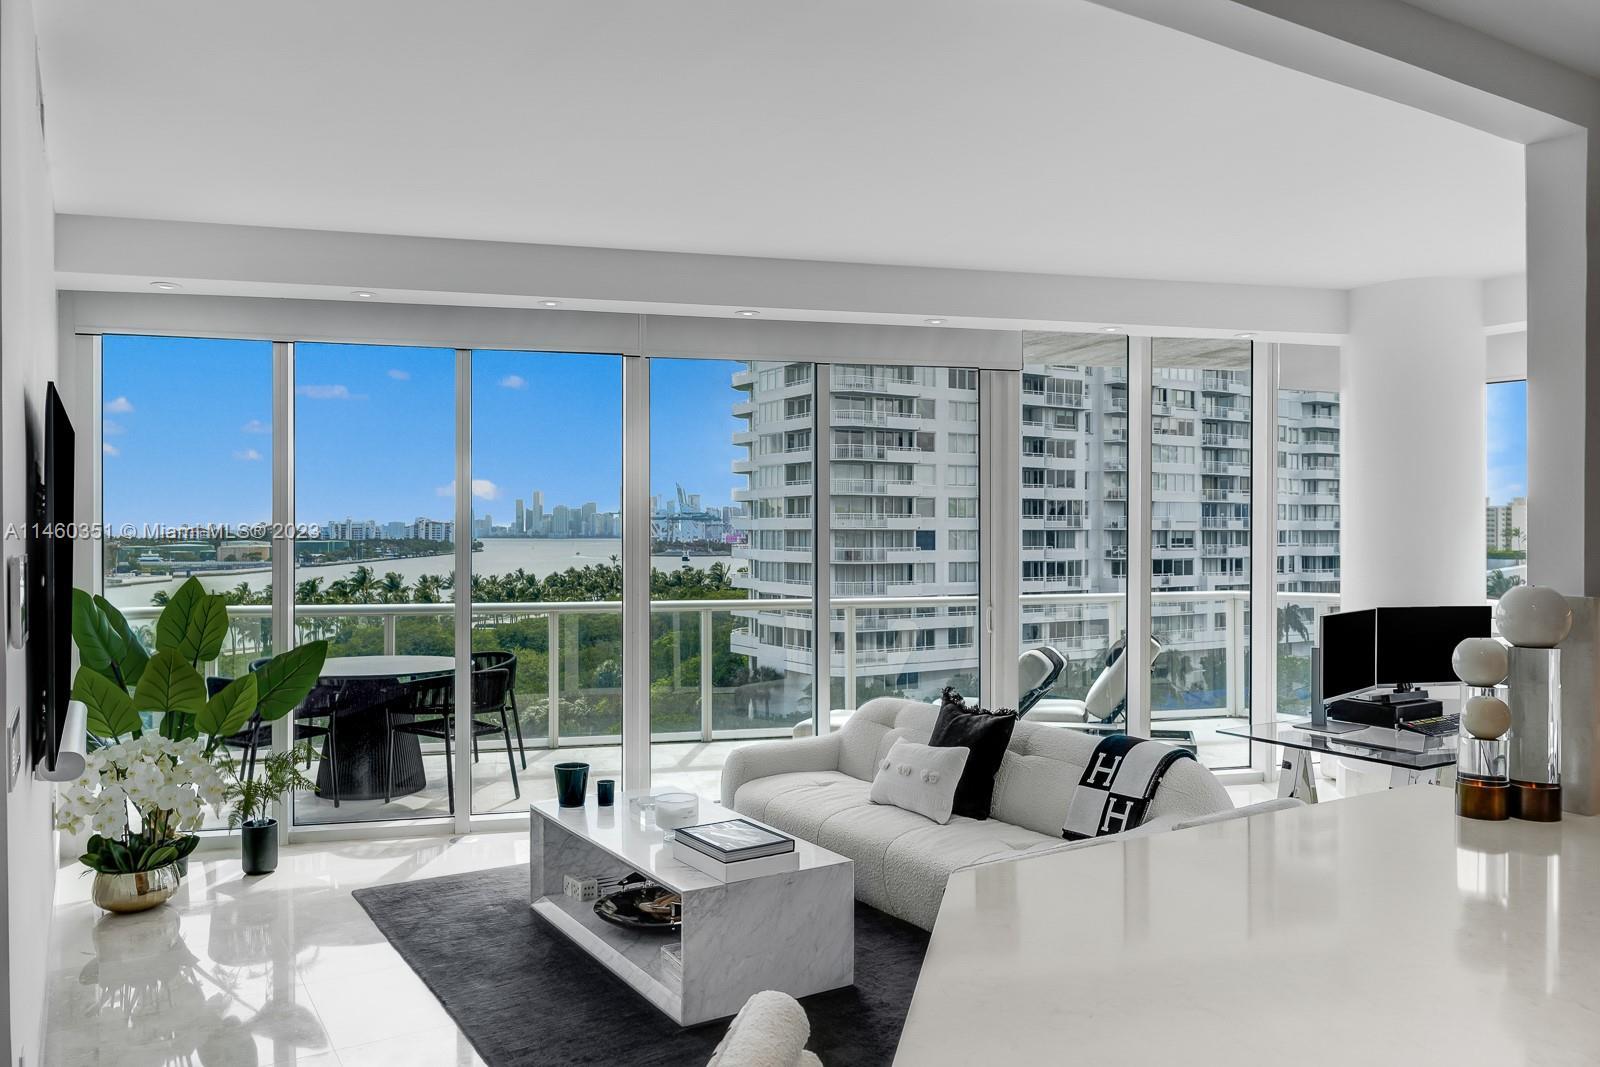 Enjoy unobstructed sunsets in this rare corner luxury residence.  Take in views of Fisher Island, Go